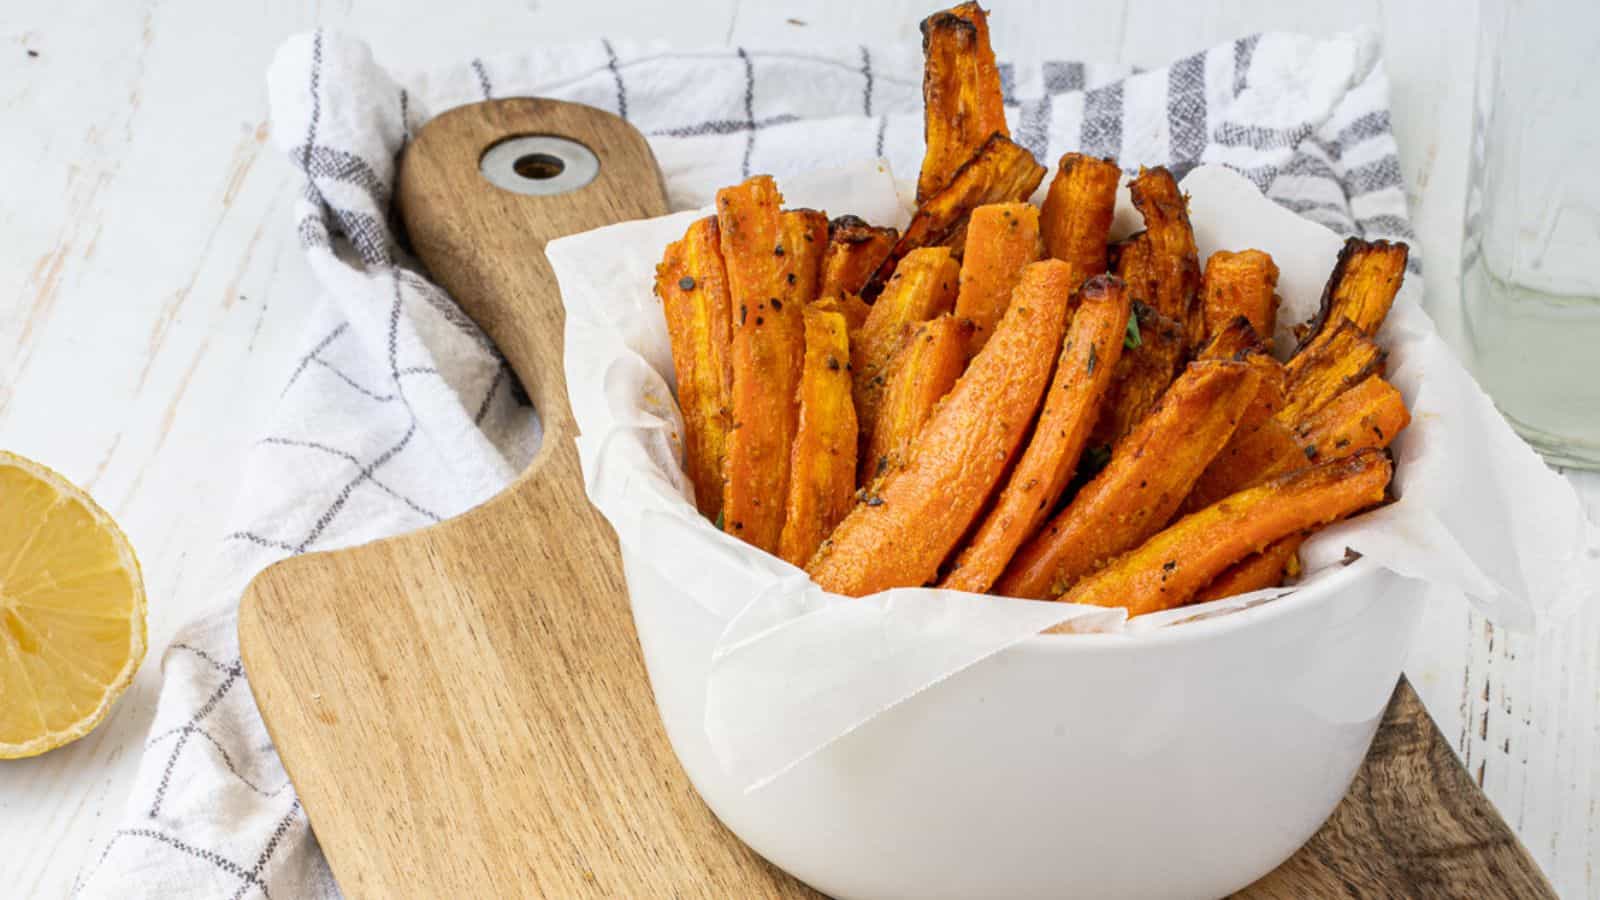 <p>These air fryer carrot fries are a unique and tasty alternative to traditional game day snacks. Crispy and flavorful, they’re a healthier option that doesn’t compromise on taste. Perfect for dipping and snacking, these carrot fries add a pop of color and nutrition to your spread.<br><strong>Get the Recipe: </strong><a href="https://twocityvegans.com/air-fryer-carrot-fries/?utm_source=msn&utm_medium=page&utm_campaign=msn" rel="noopener">Air Fryer Carrot Fries</a></p>